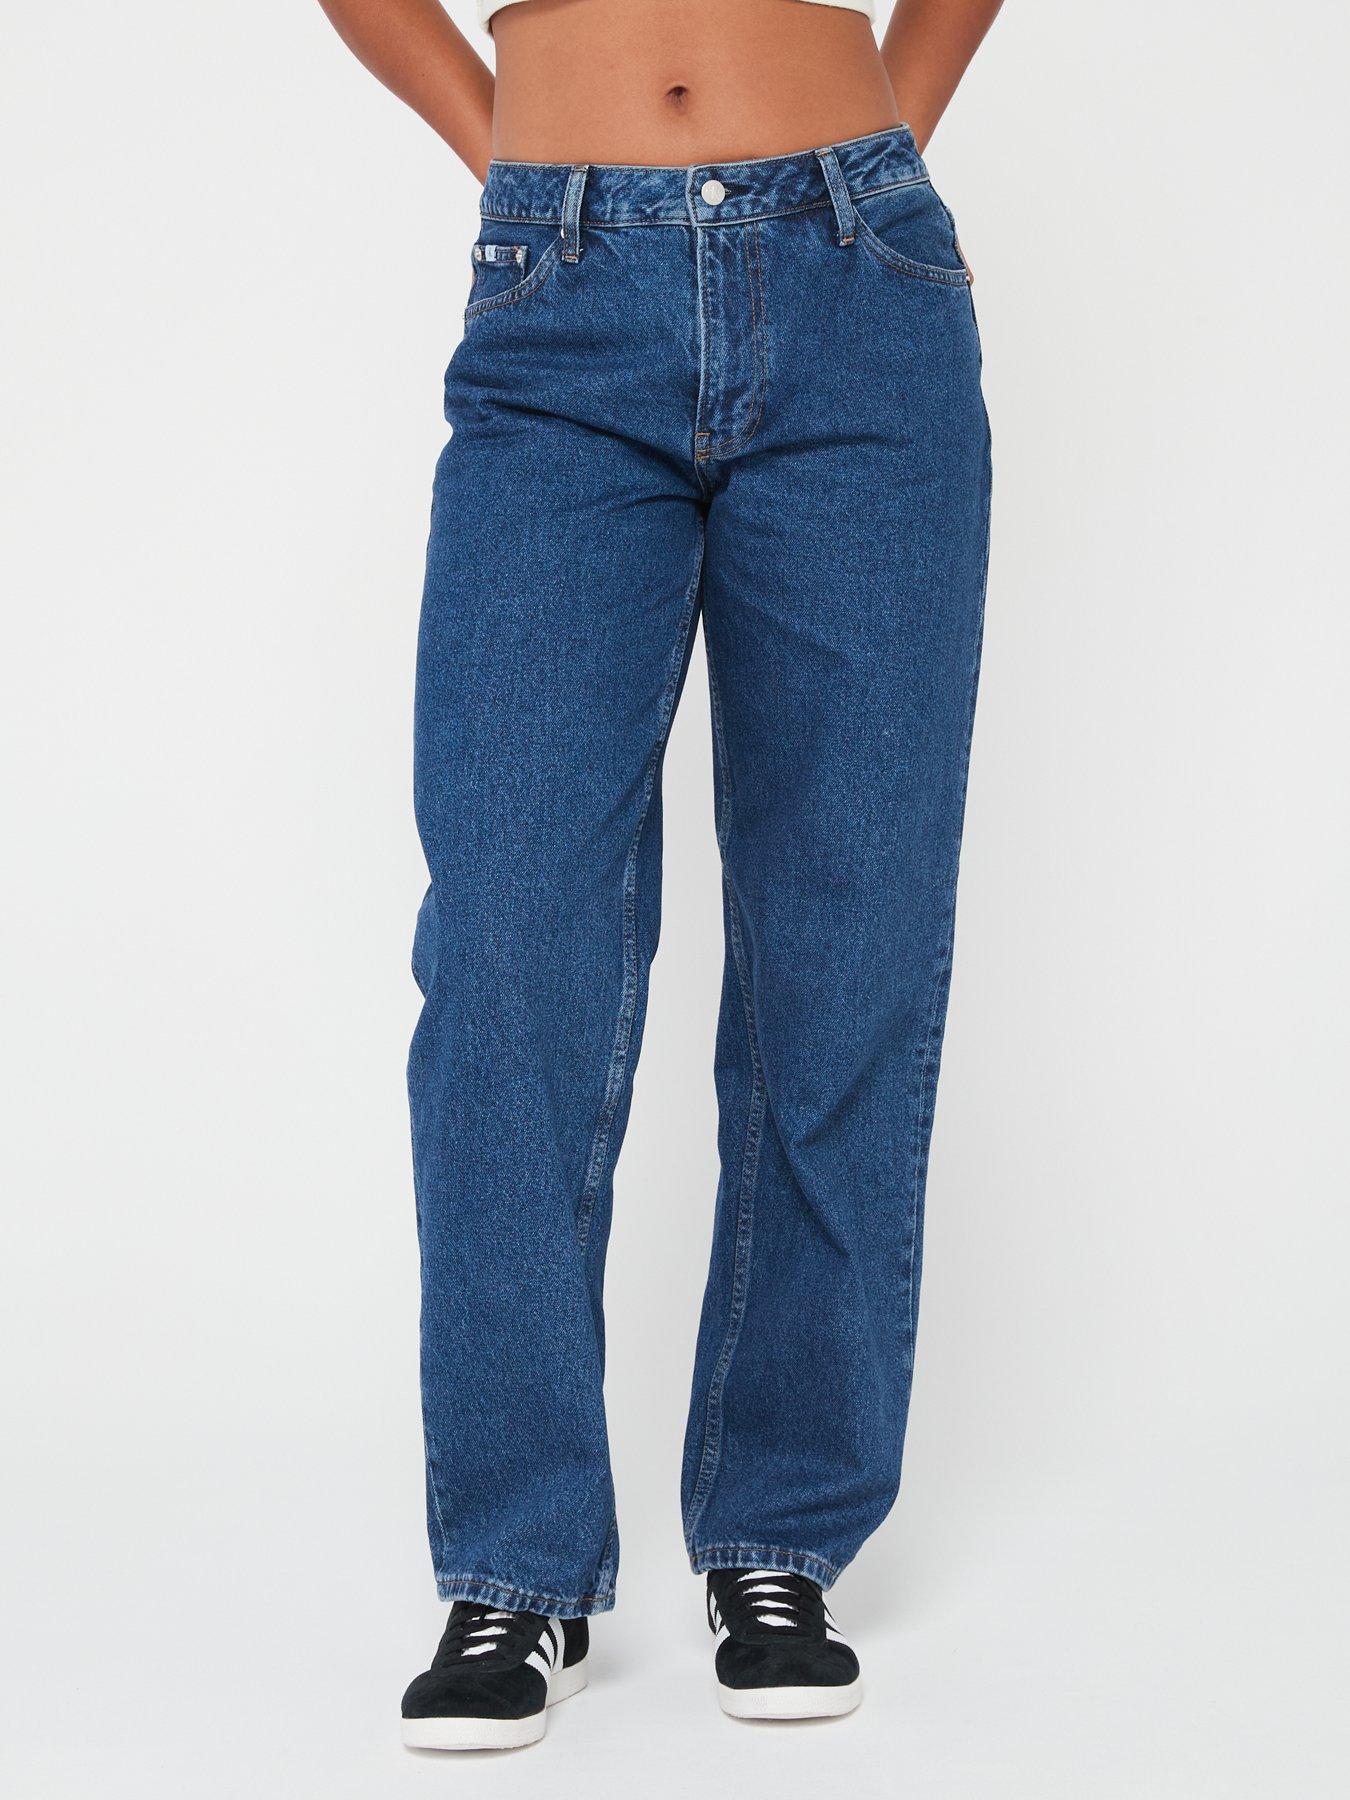 1990/00s 28 CALVIN KLEIN Relaxed Fit Jeans